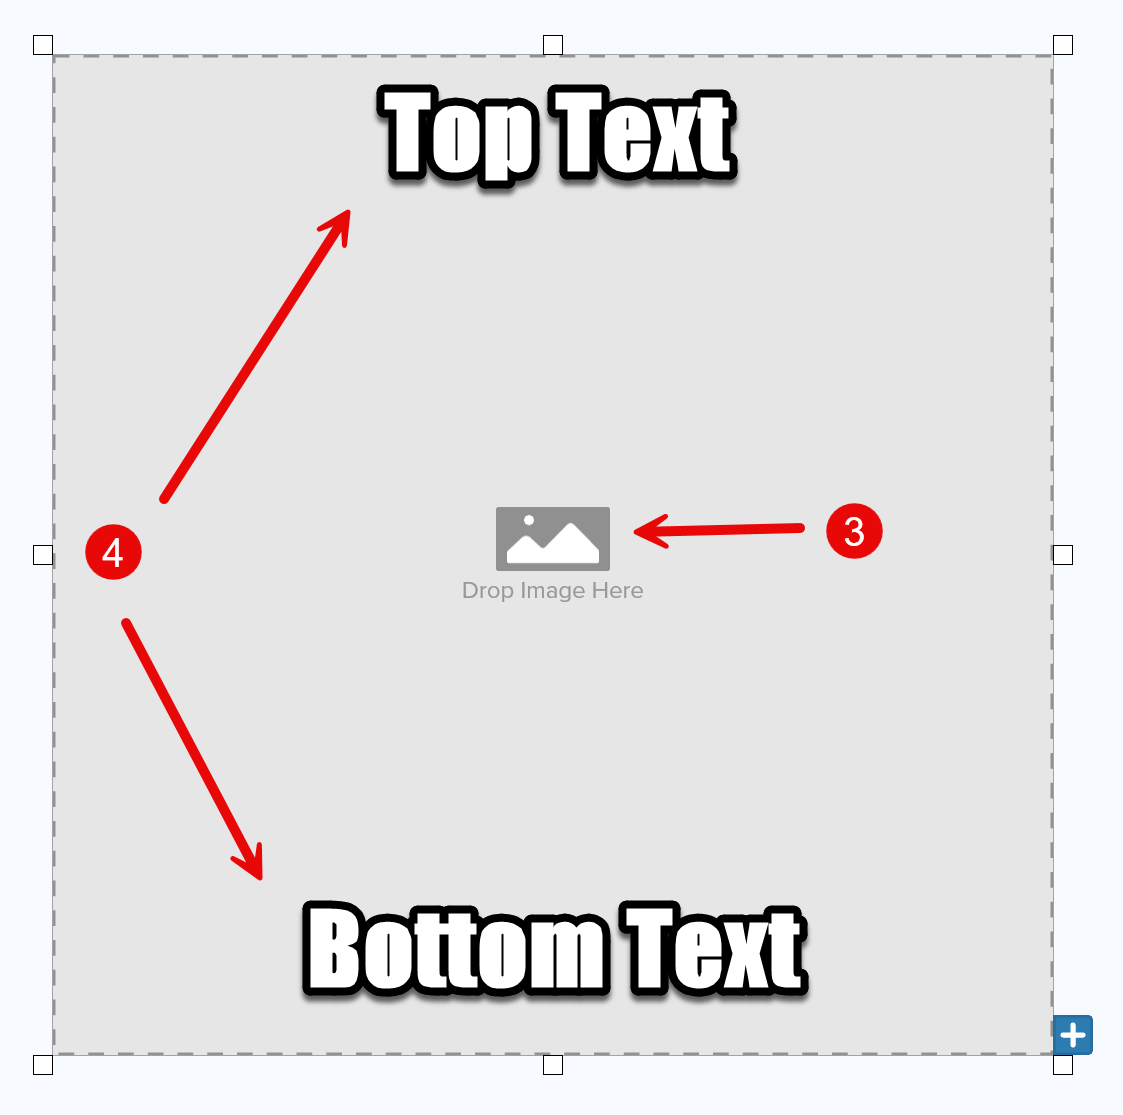 Open meme template in Snagit with text and photo placeholders.